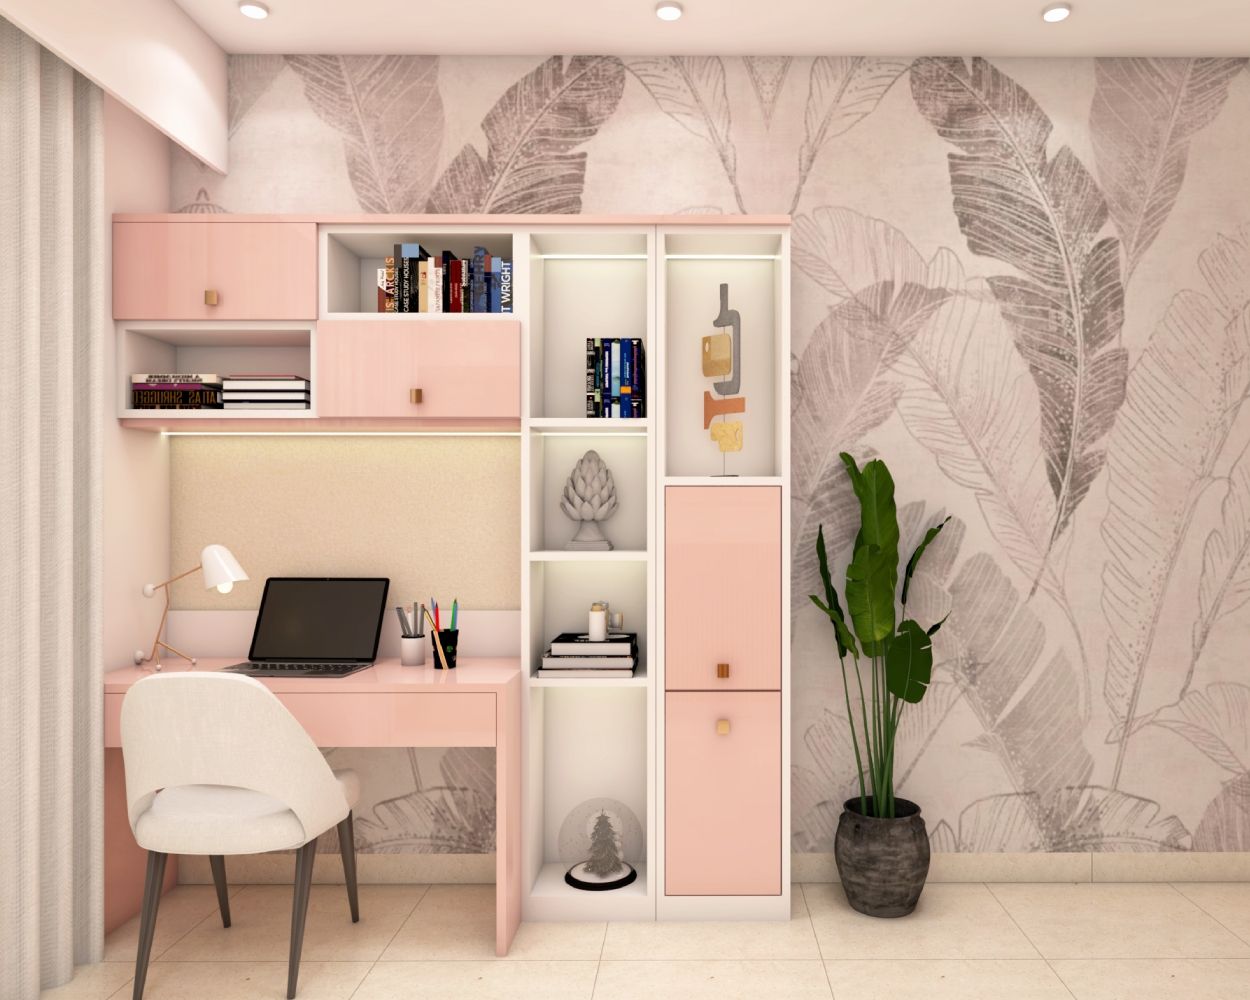 Modern Pink And White Home Office Design With Grey-White Leafy Wallpaper